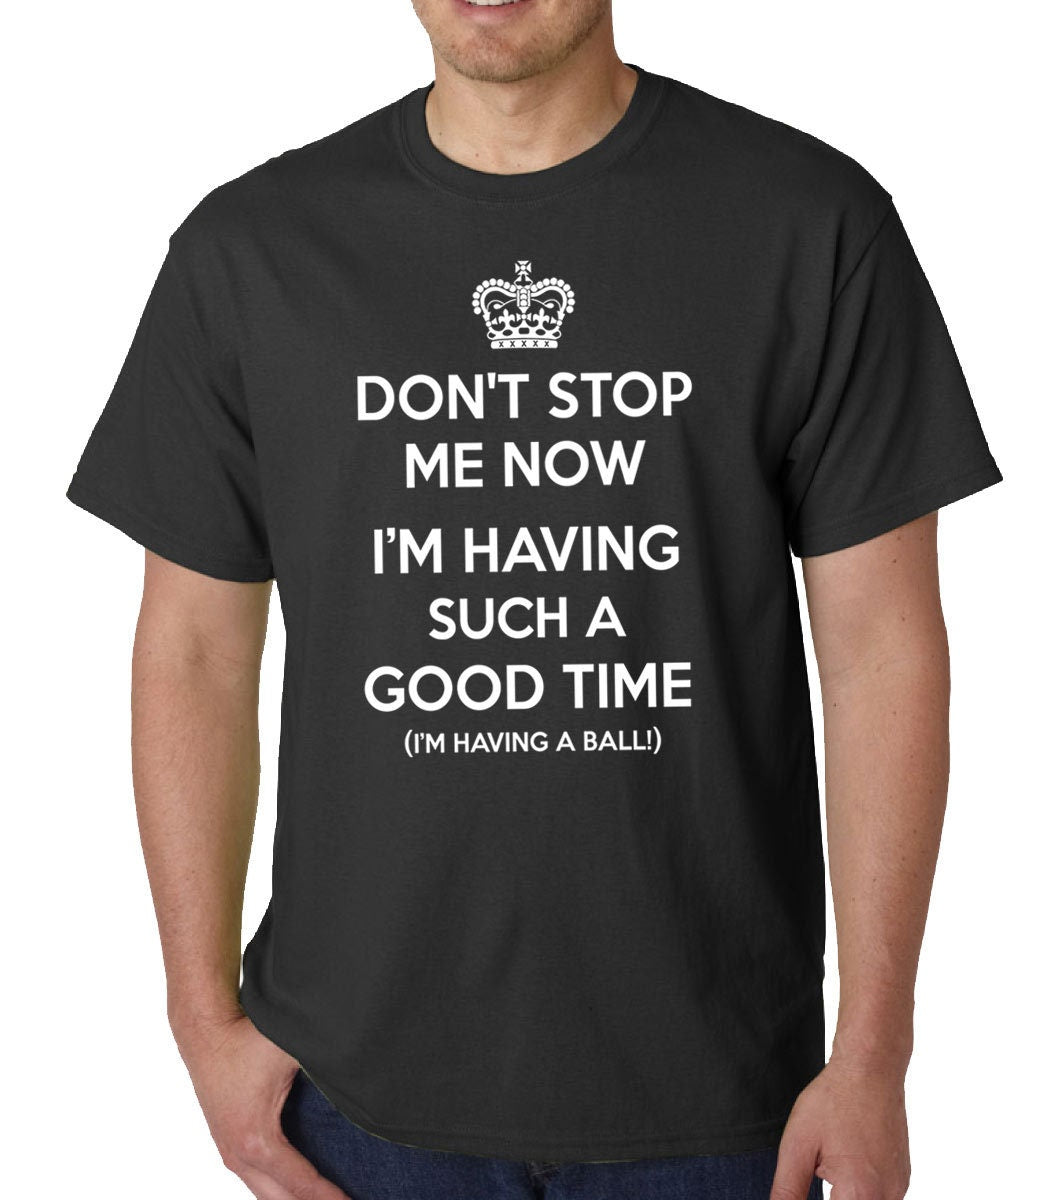 Don't Stop Me Now... t-shirt